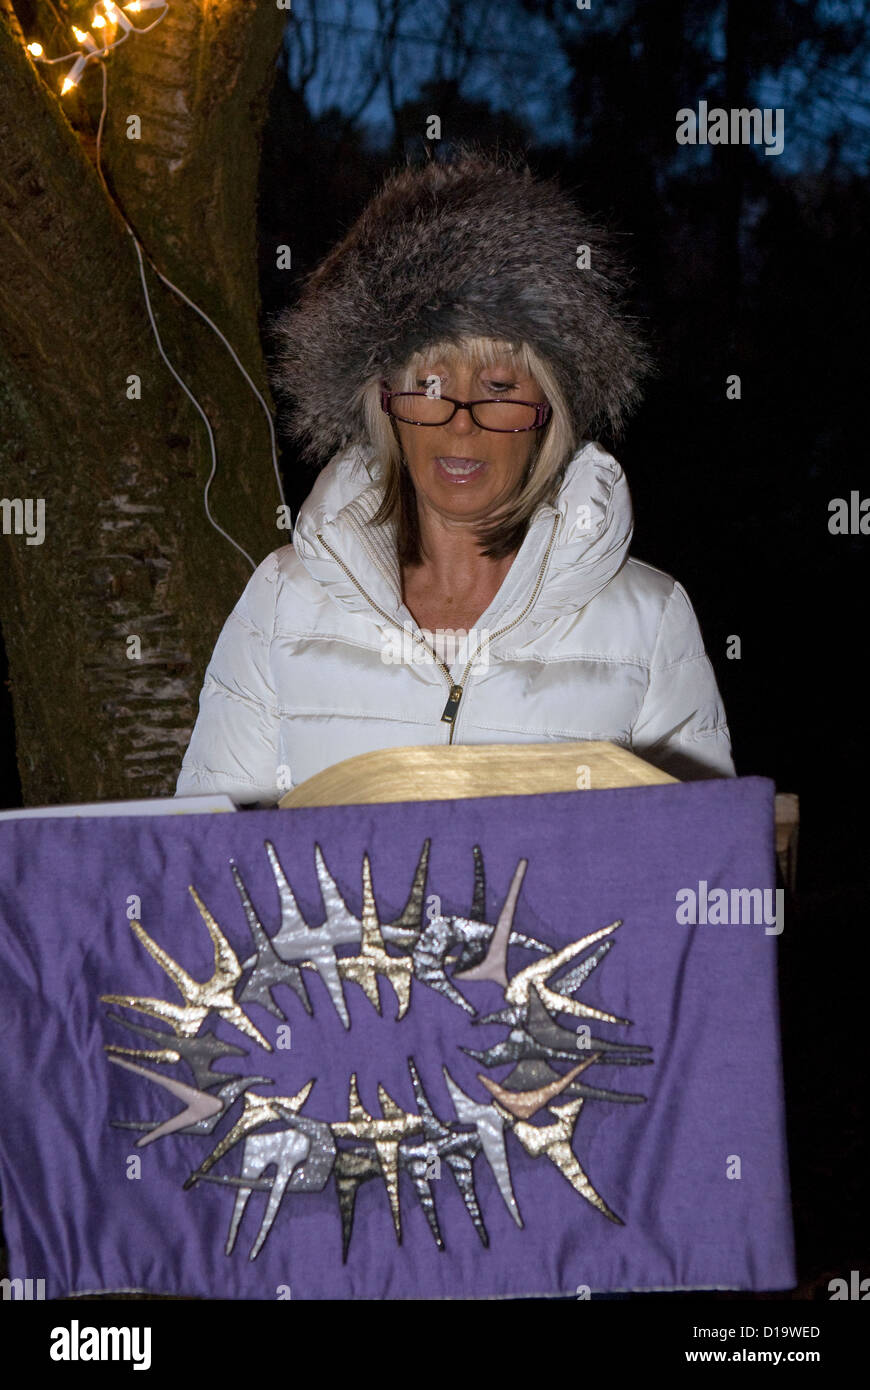 Local resident giving a bible reading at an evening outdoor carol service at christmas time, Farnham, Surrey, UK. Stock Photo